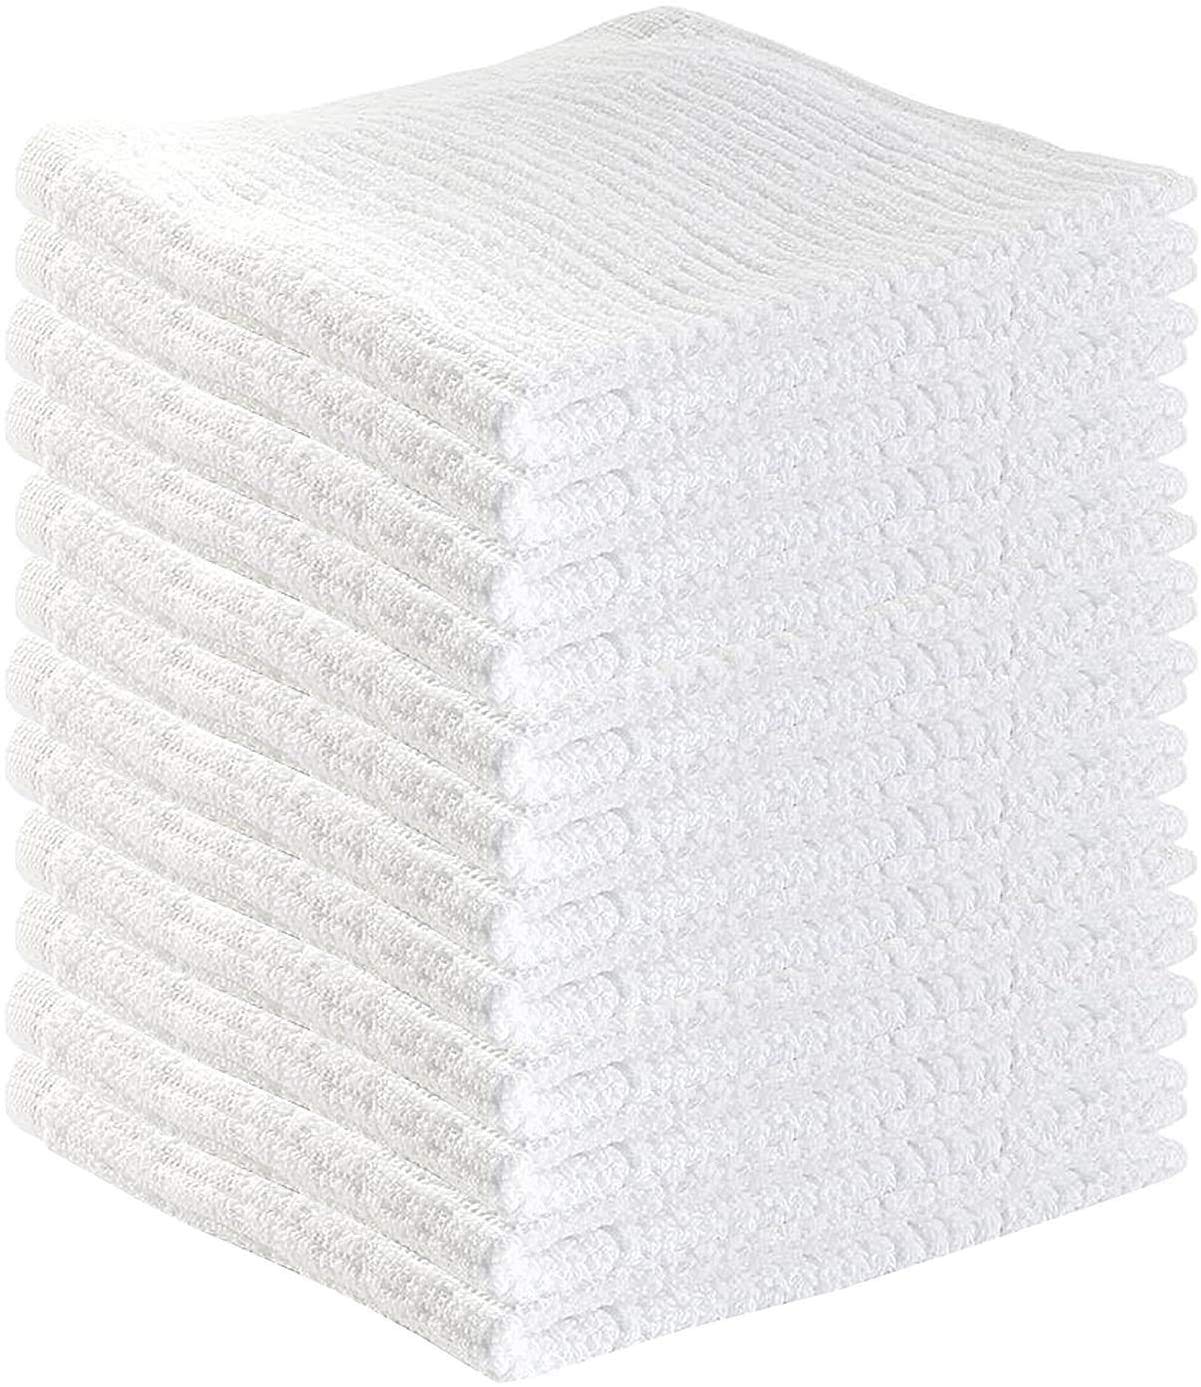 EOM Towels Bar Towels - Bar Mop Cleaning Kitchen Towels (9 Pack 16" x 19") - Premium Ring-Spun Cotton White Kitchen Bar Towels, Restaurant Cleaning Towels, Shop Towels and Rags - Bulk Bar Mop Set